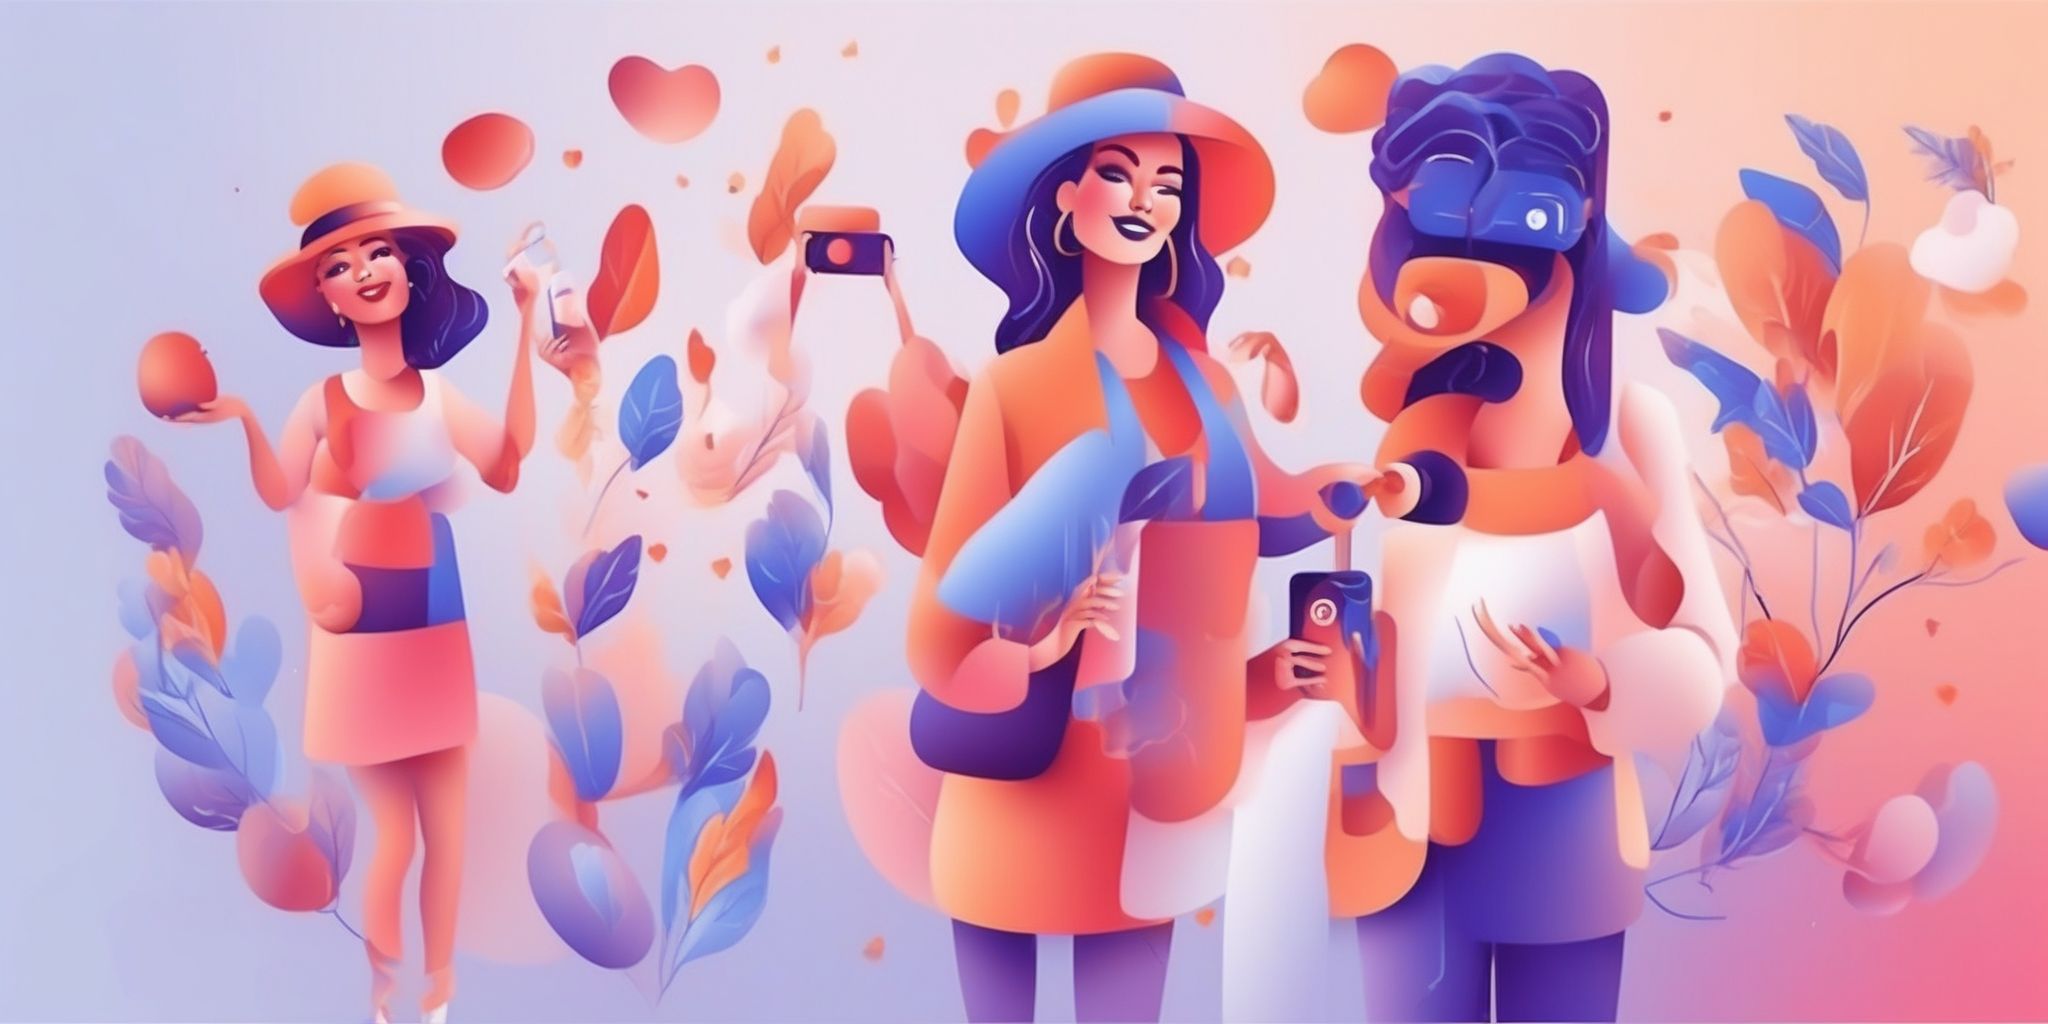 Influencer promotion in illustration style with gradients and white background